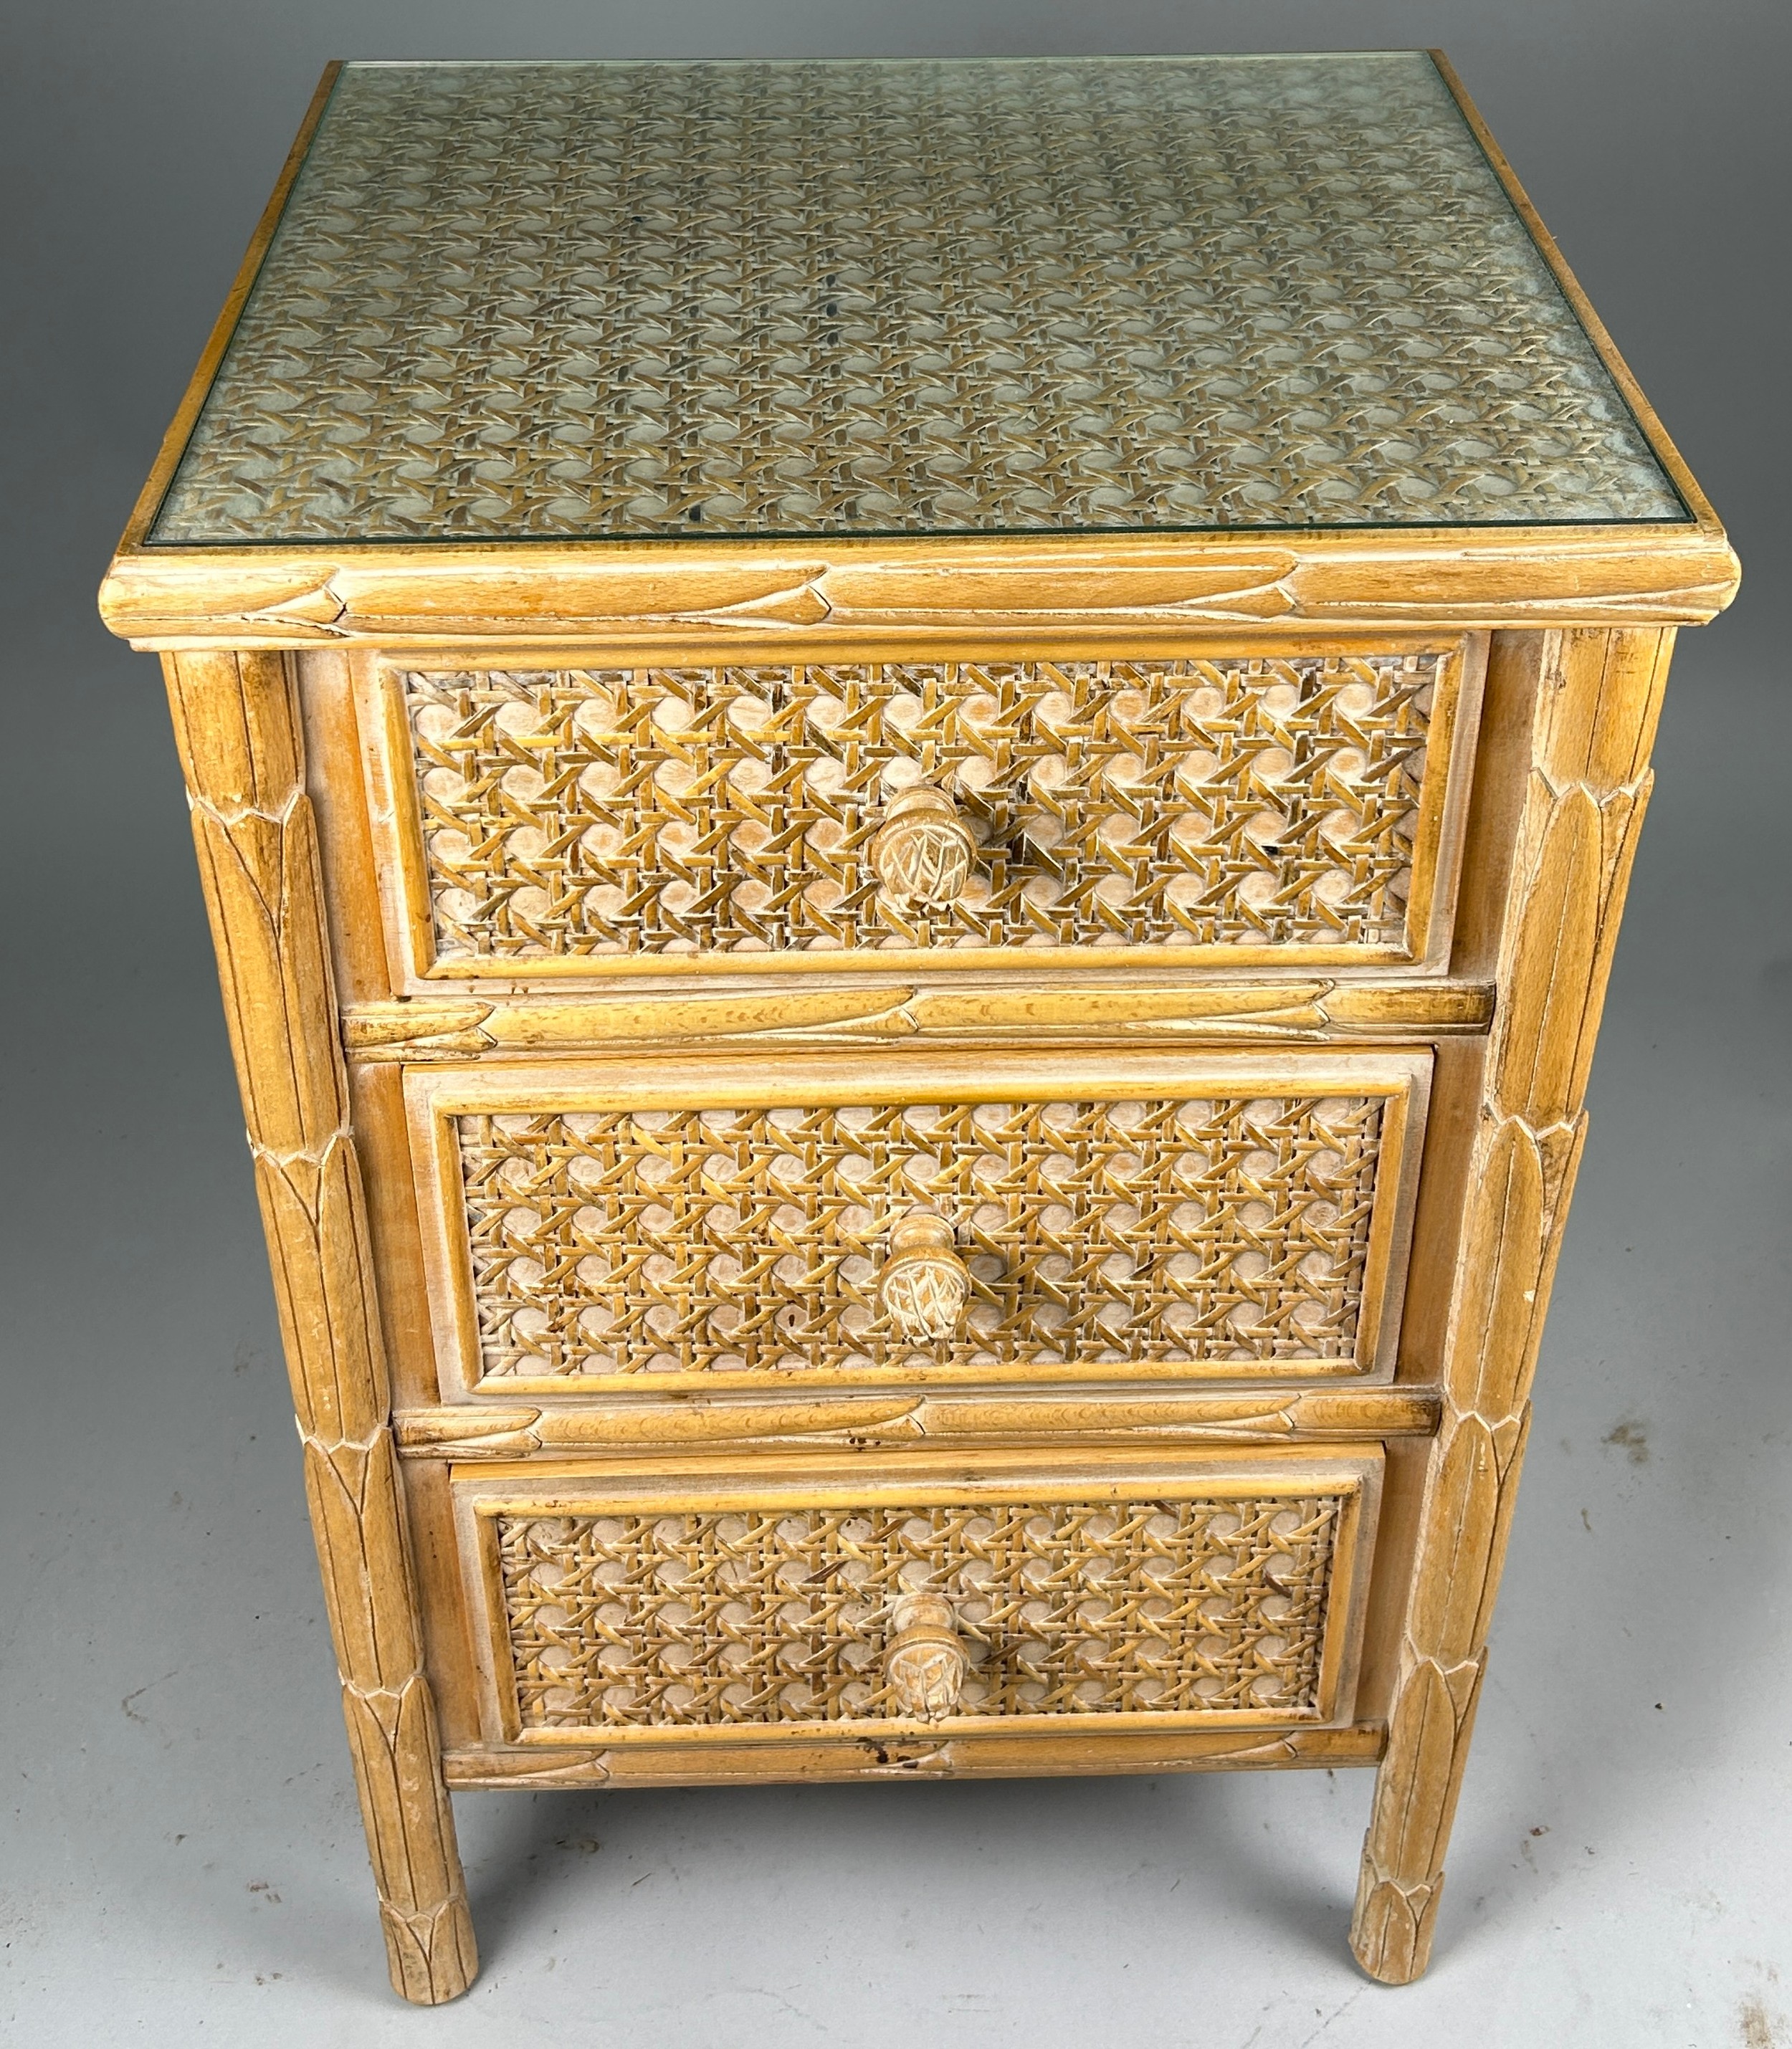 A LIMED WOOD AND CANE BEDSIDE TABLE WITH GLASS TOP 78cm x 50cm x 45cm - Image 2 of 4